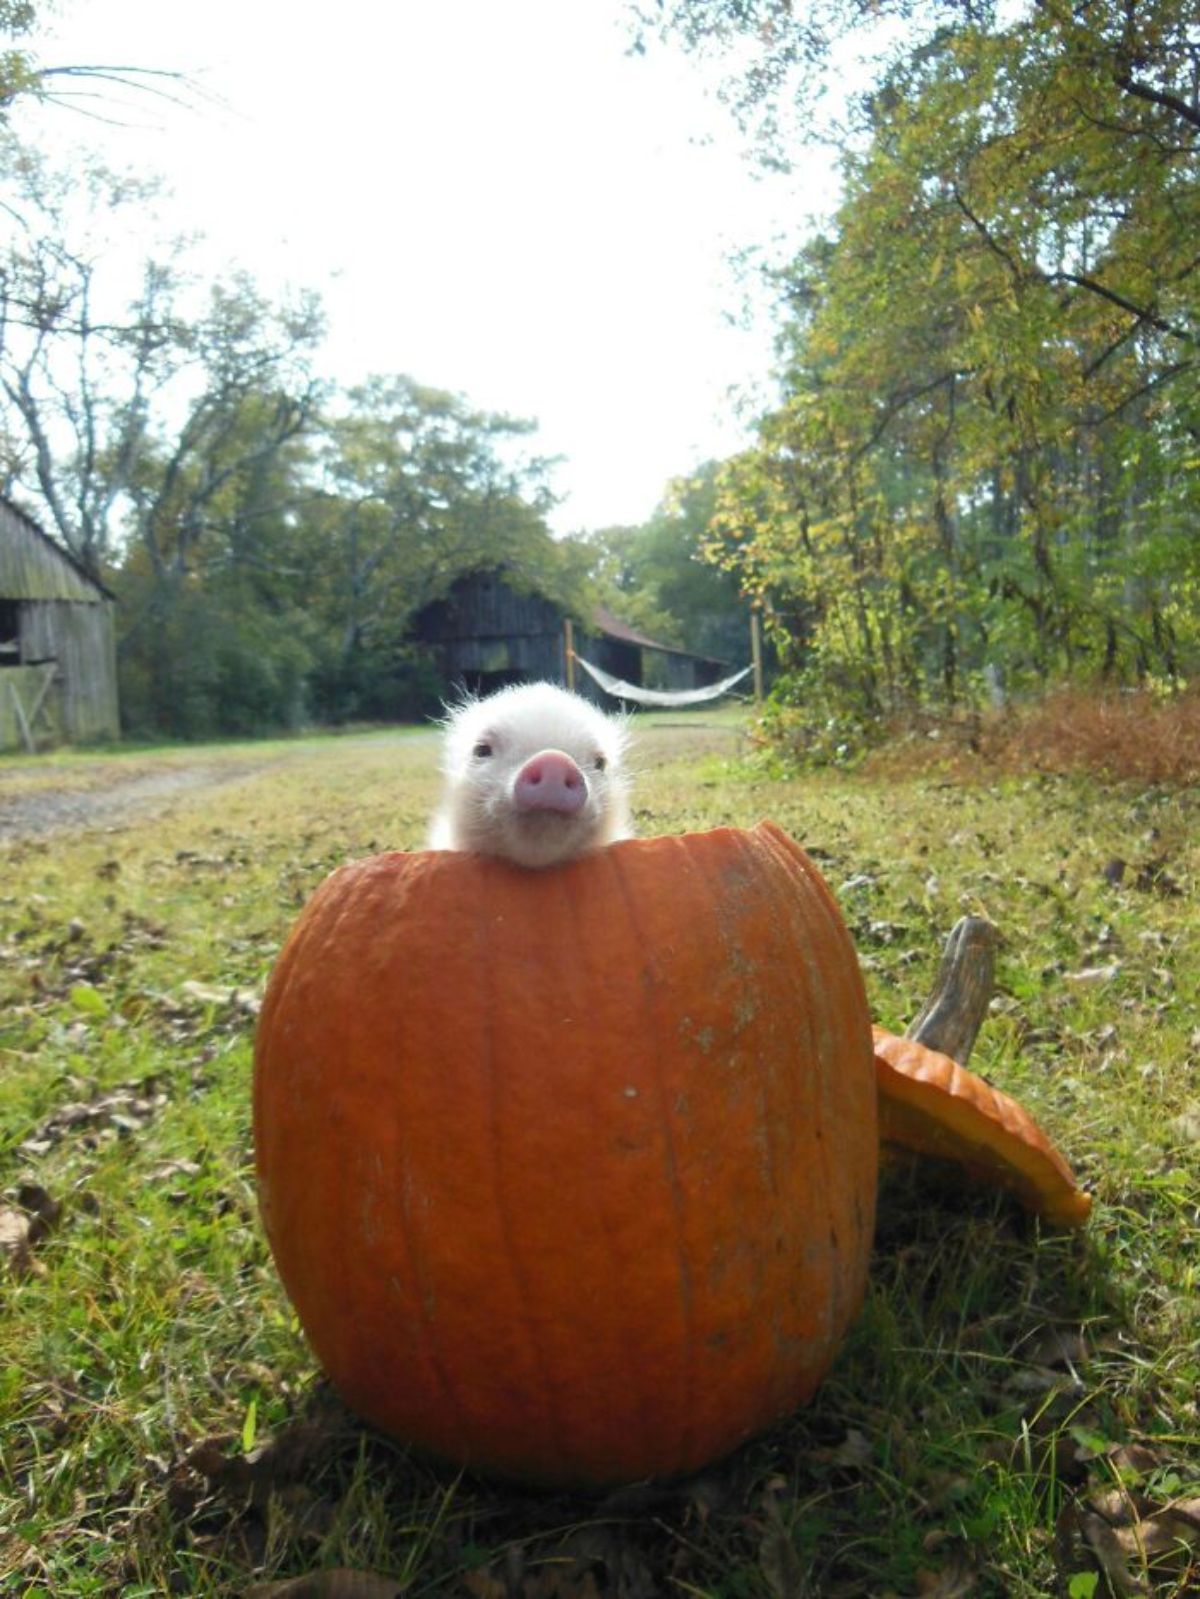 white piglet peeking over from an orange pumpkin that has the top sliced off